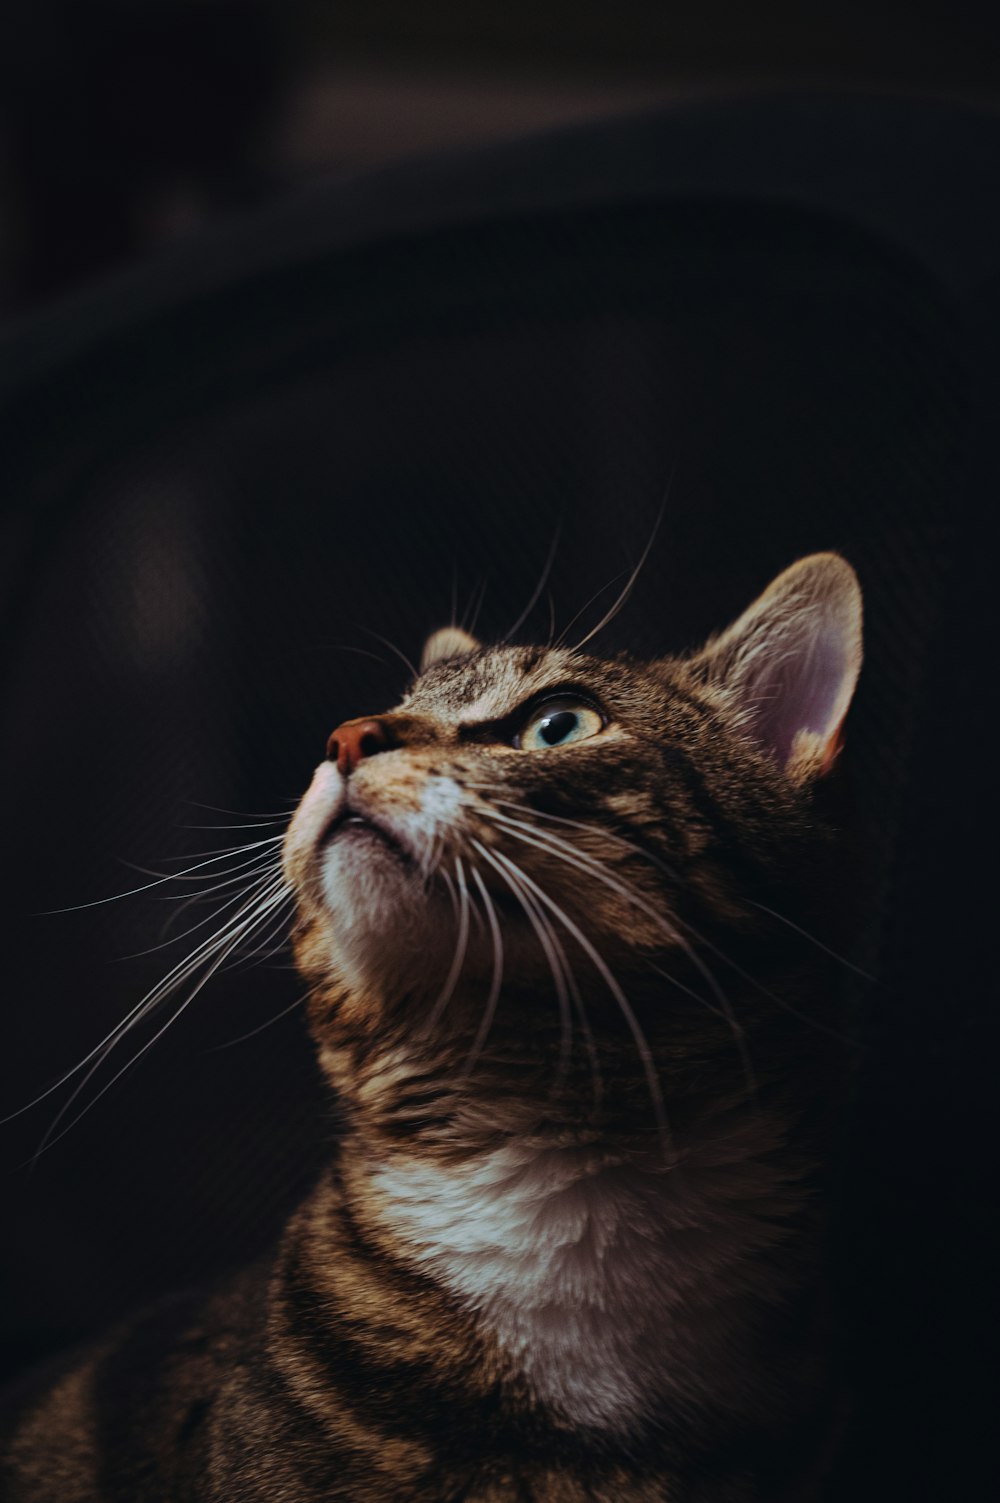 brown tabby cat in black background